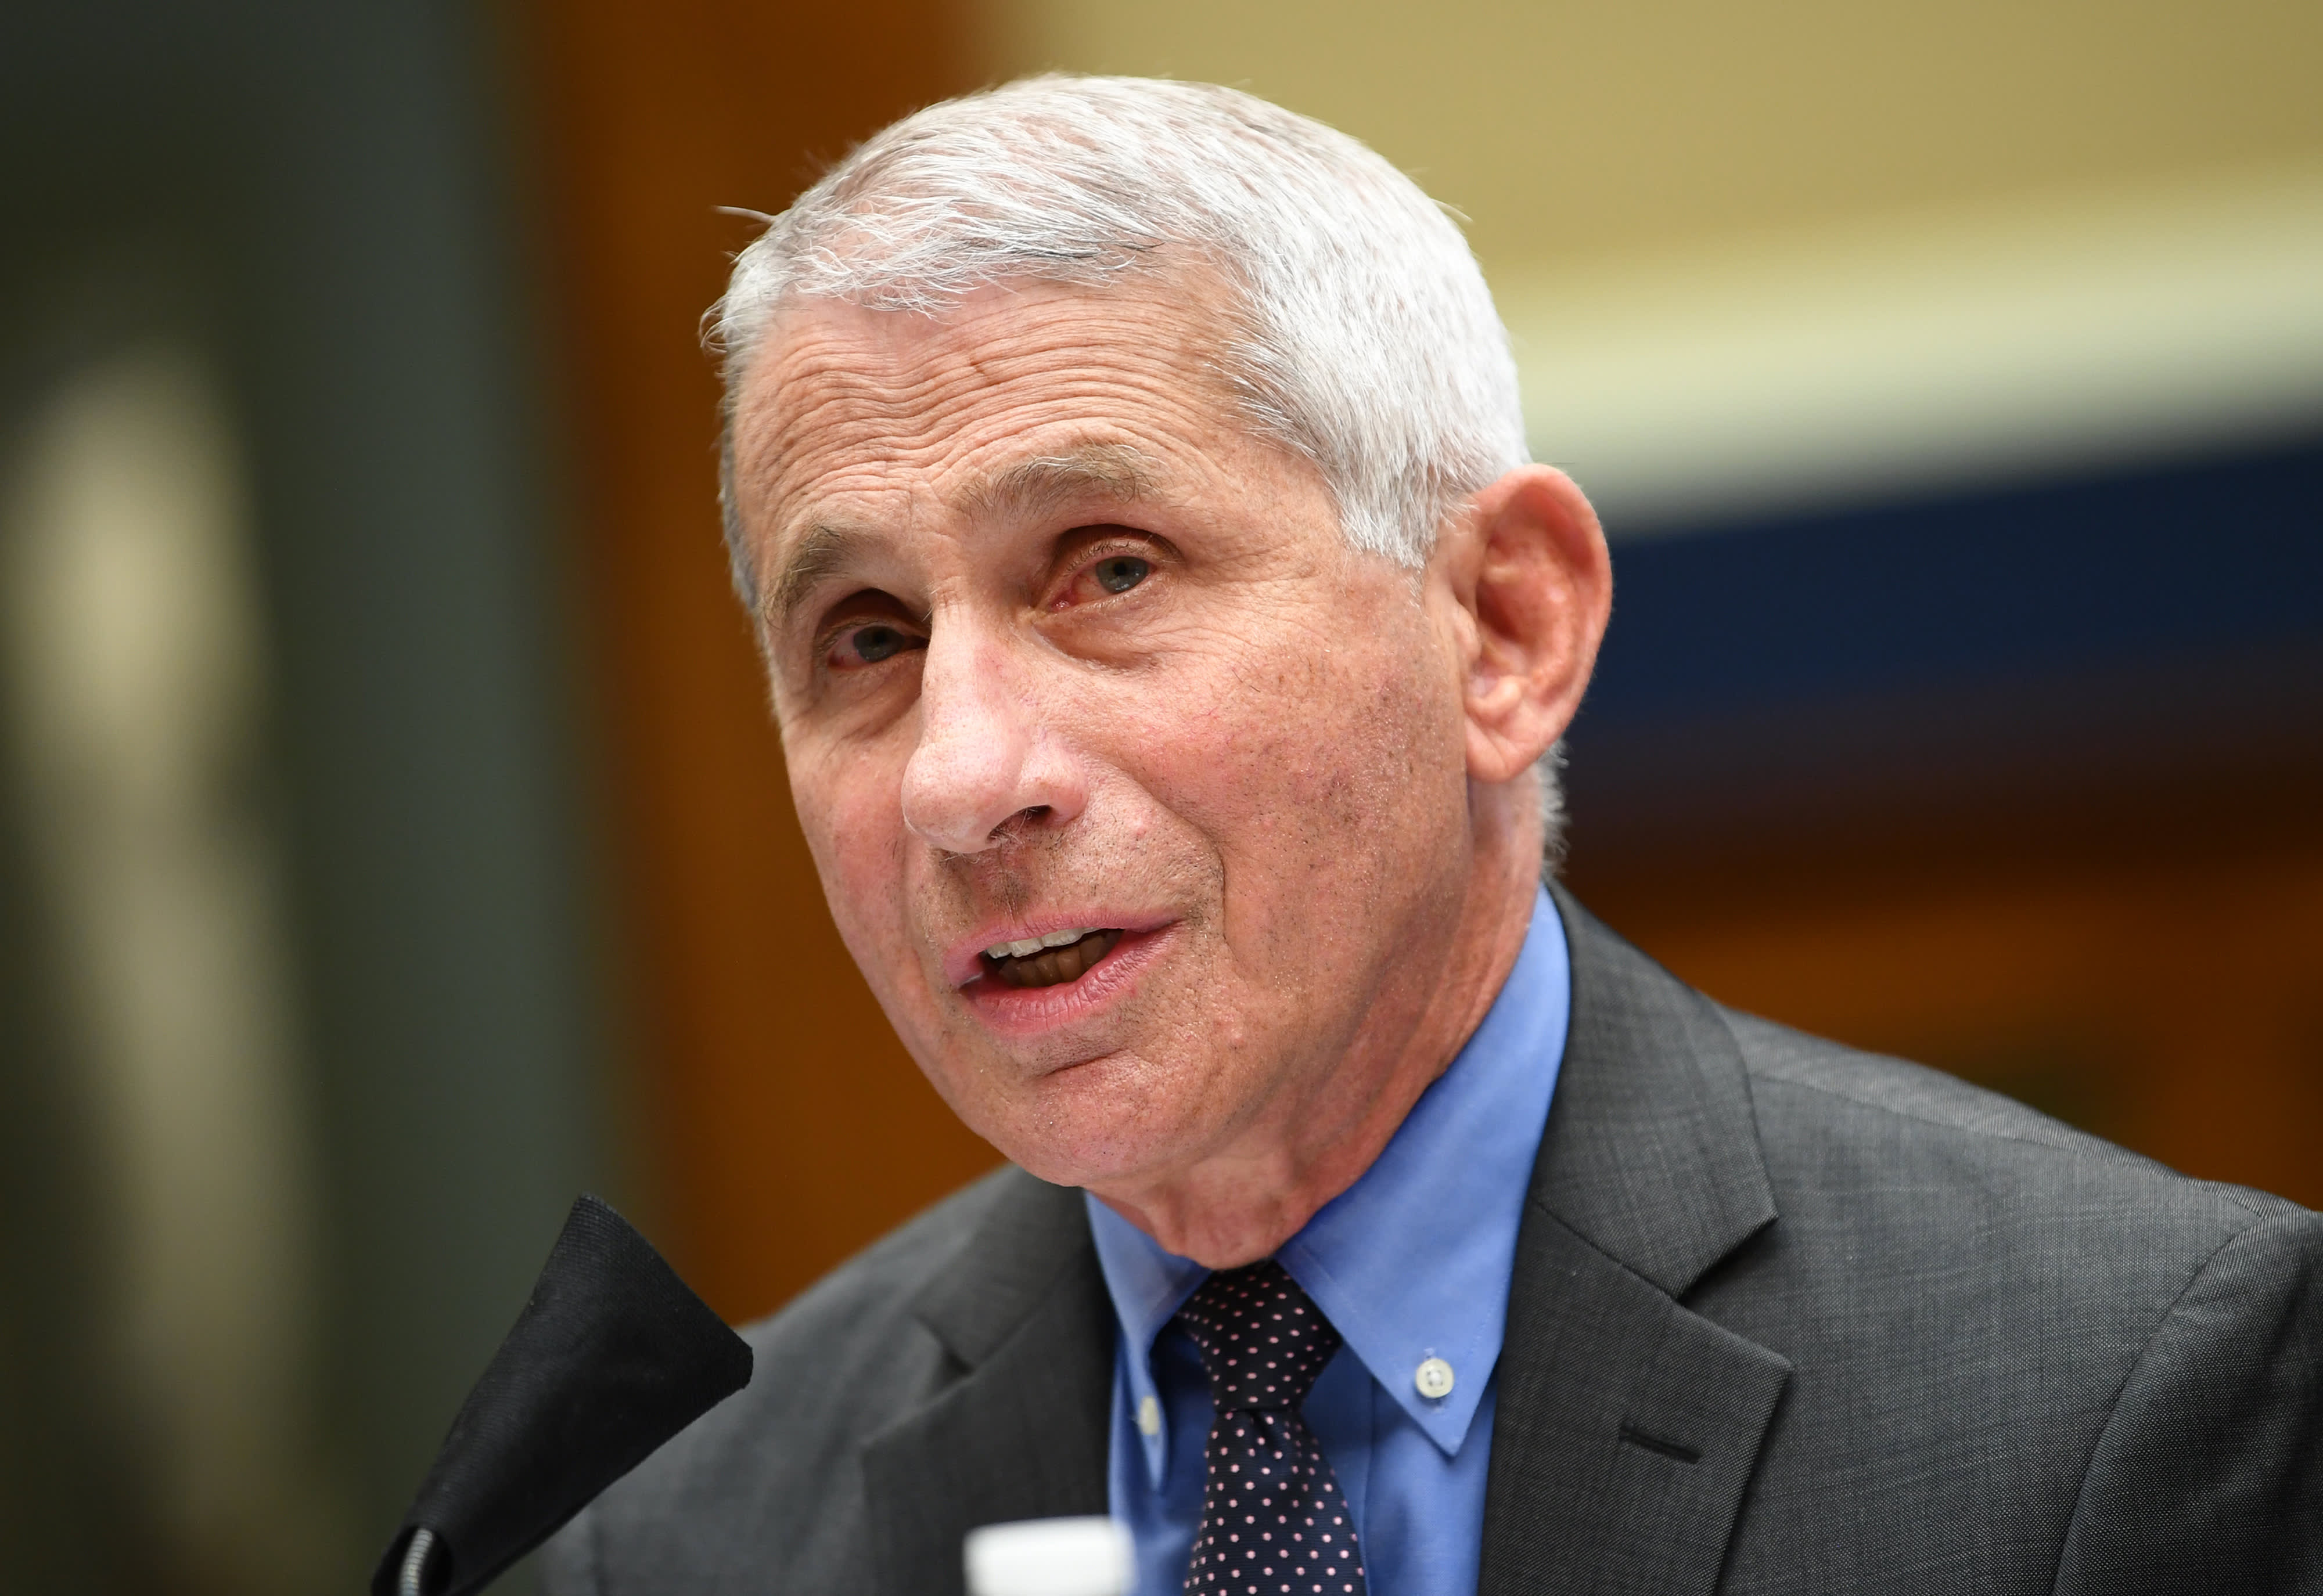 Coronavirus vaccine: Fauci says he has confidence approval won't be  political